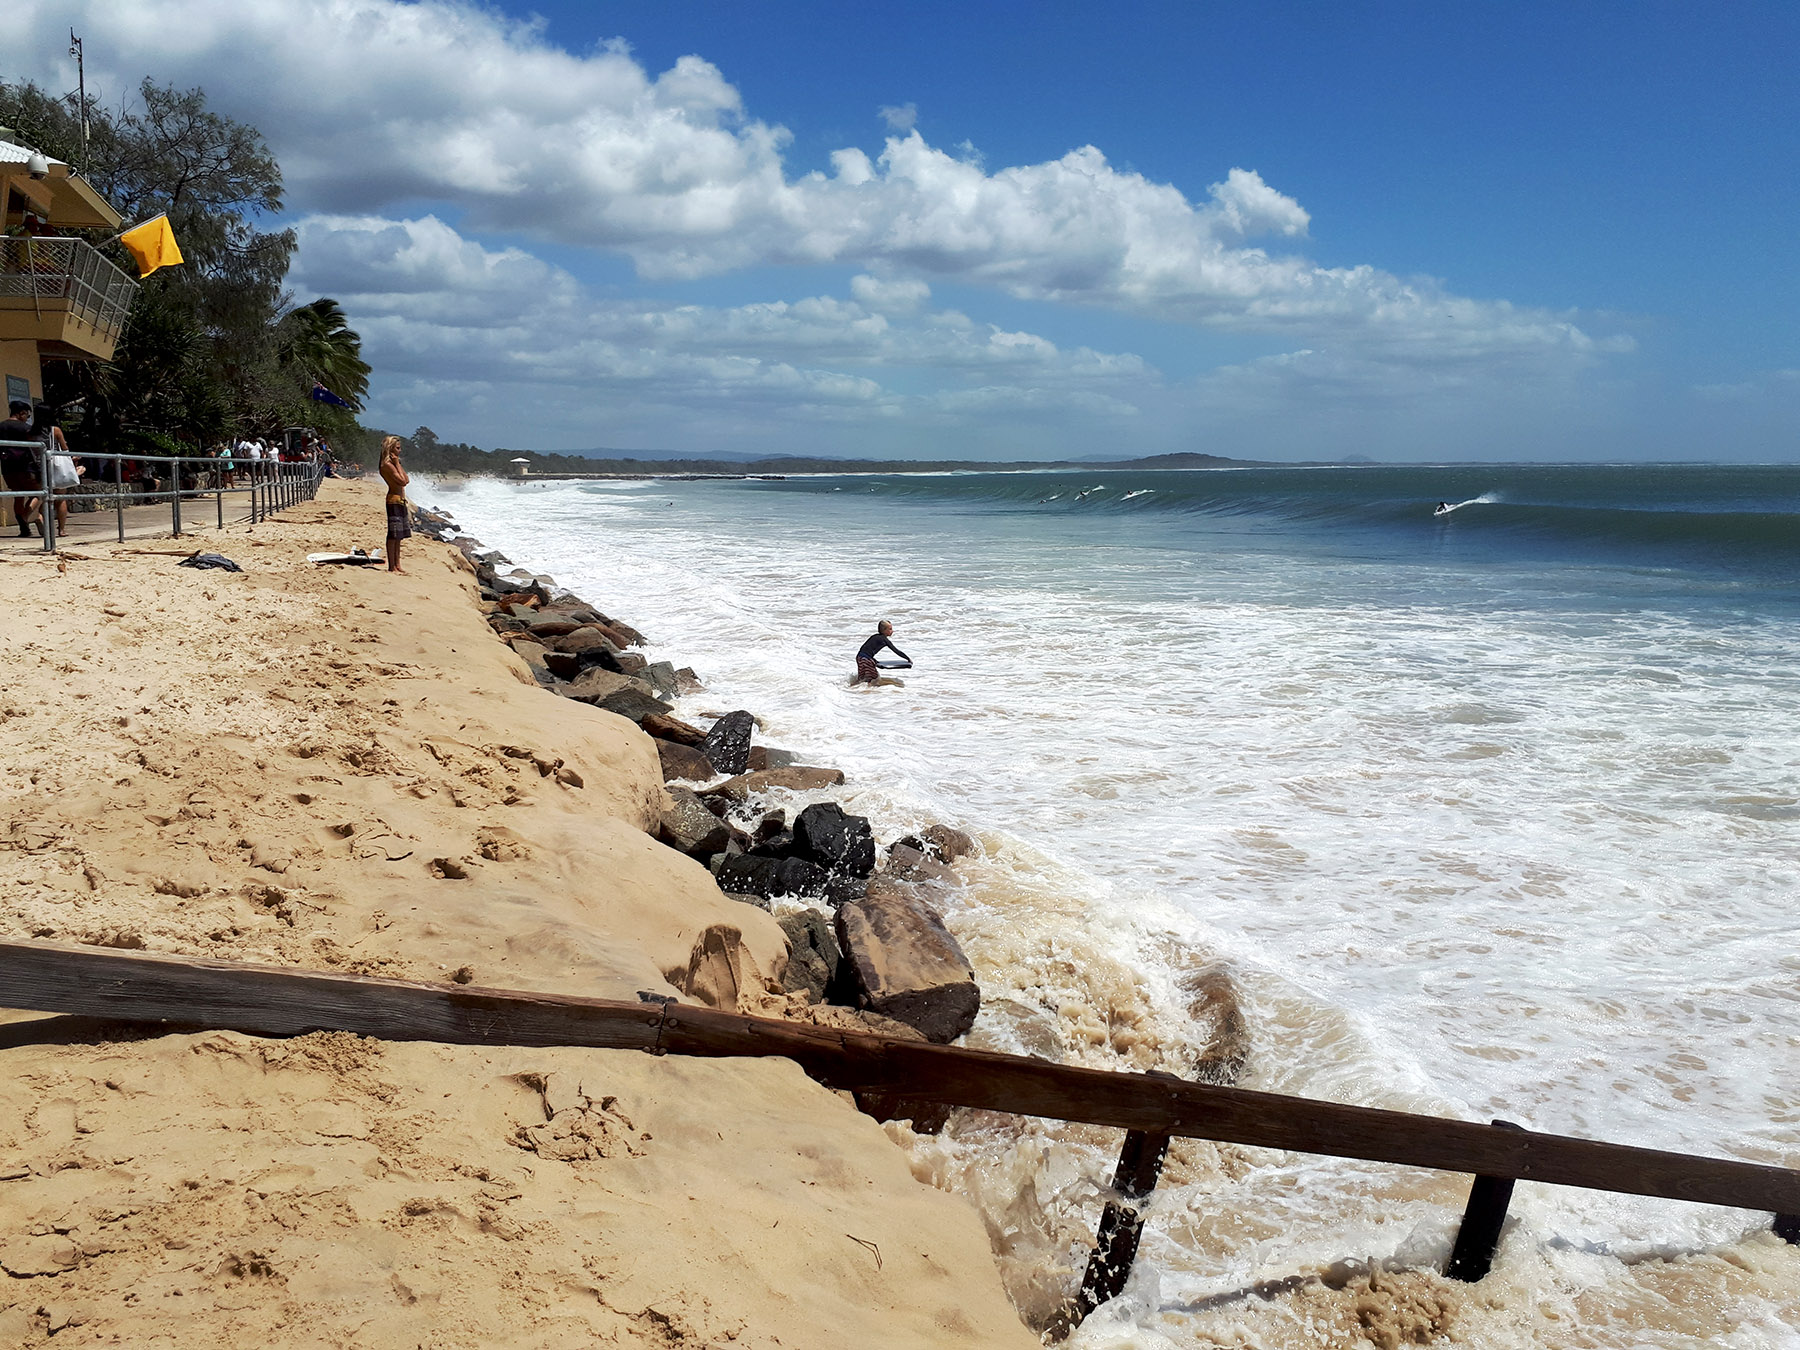 Erosion of Noosa's Main Beach by big seas whipped up by Tropical Cyclone Oma, February 2019.